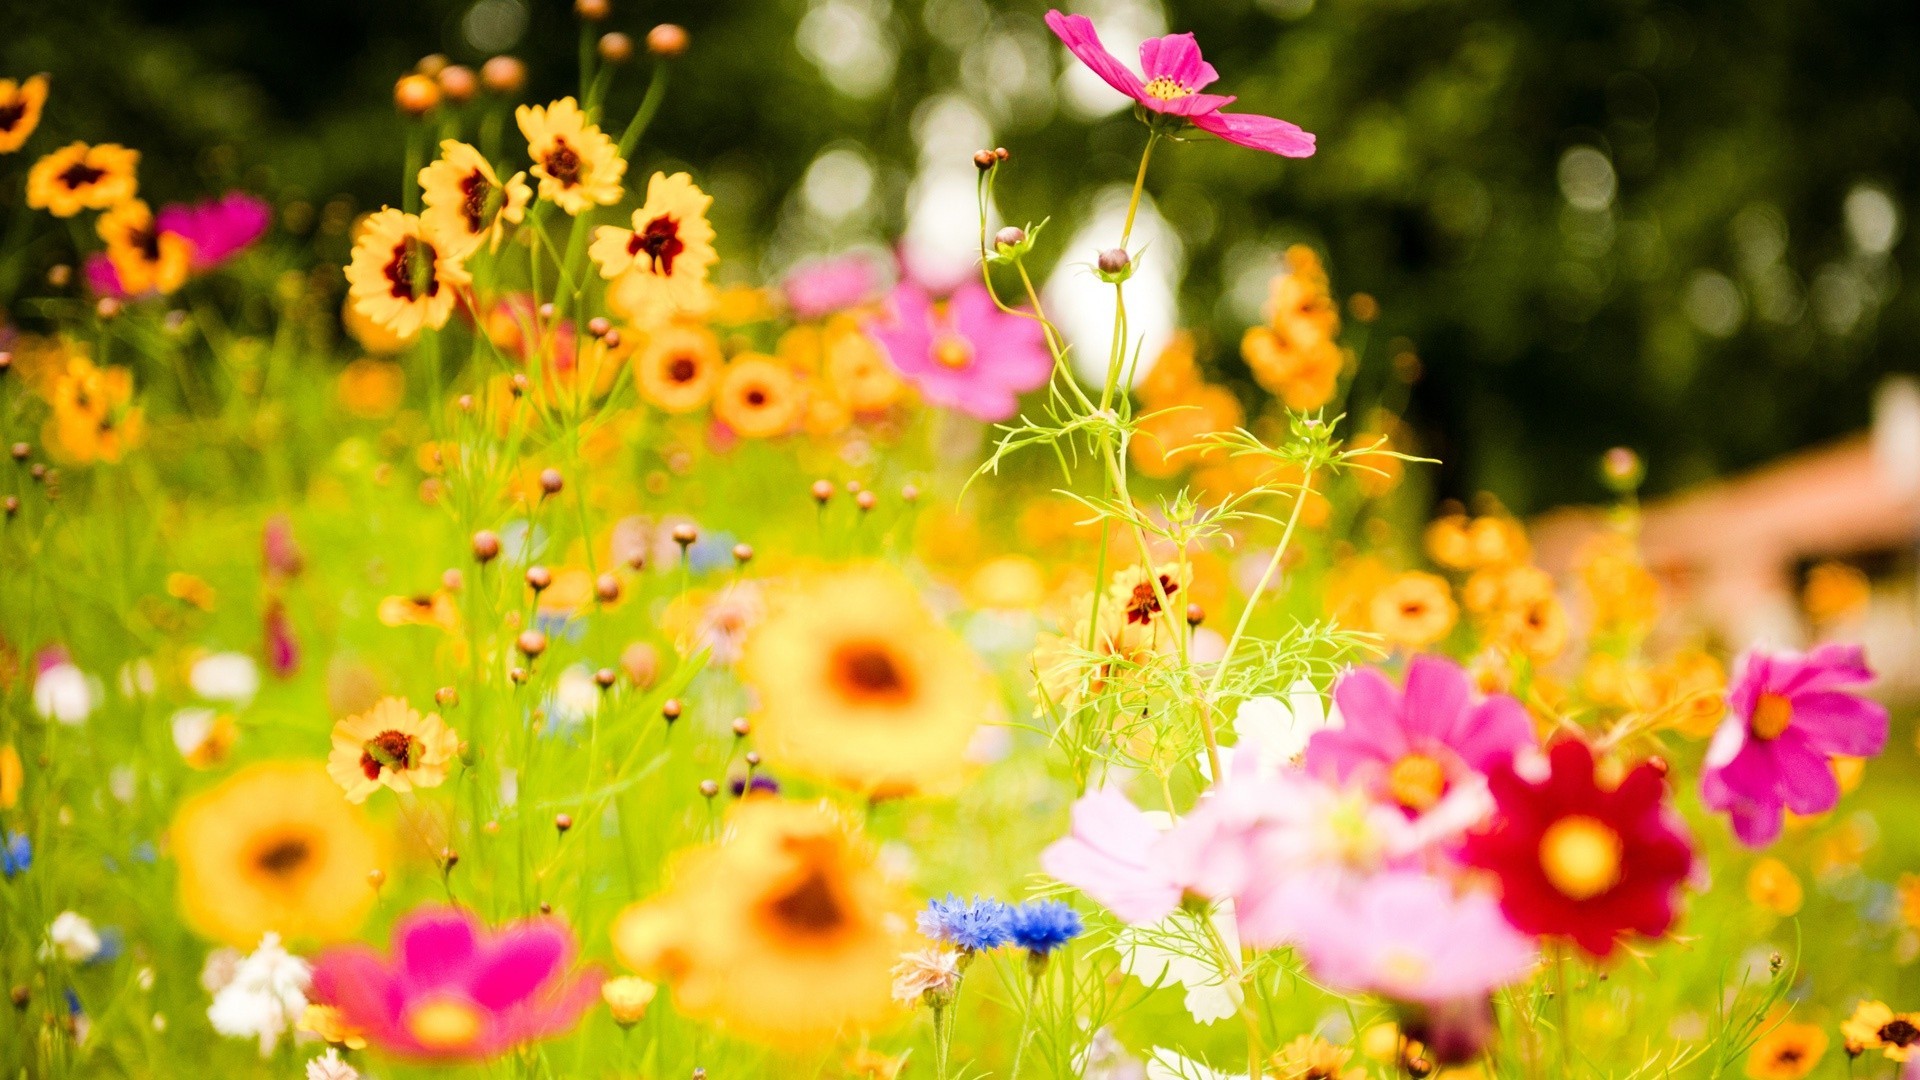 Bright Flowers Wallpapers